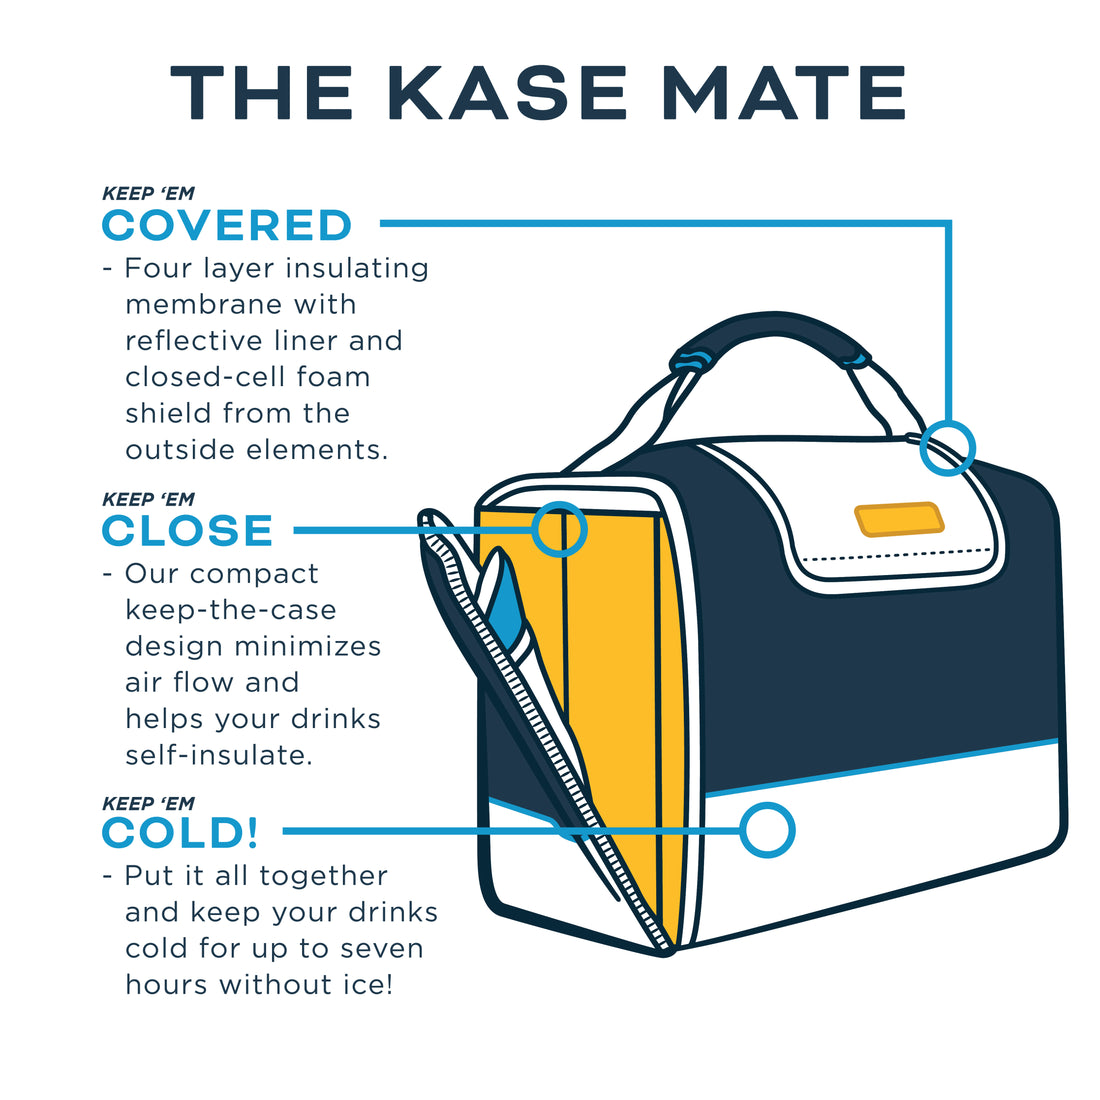 Gibson 12-Pack Kase Mate